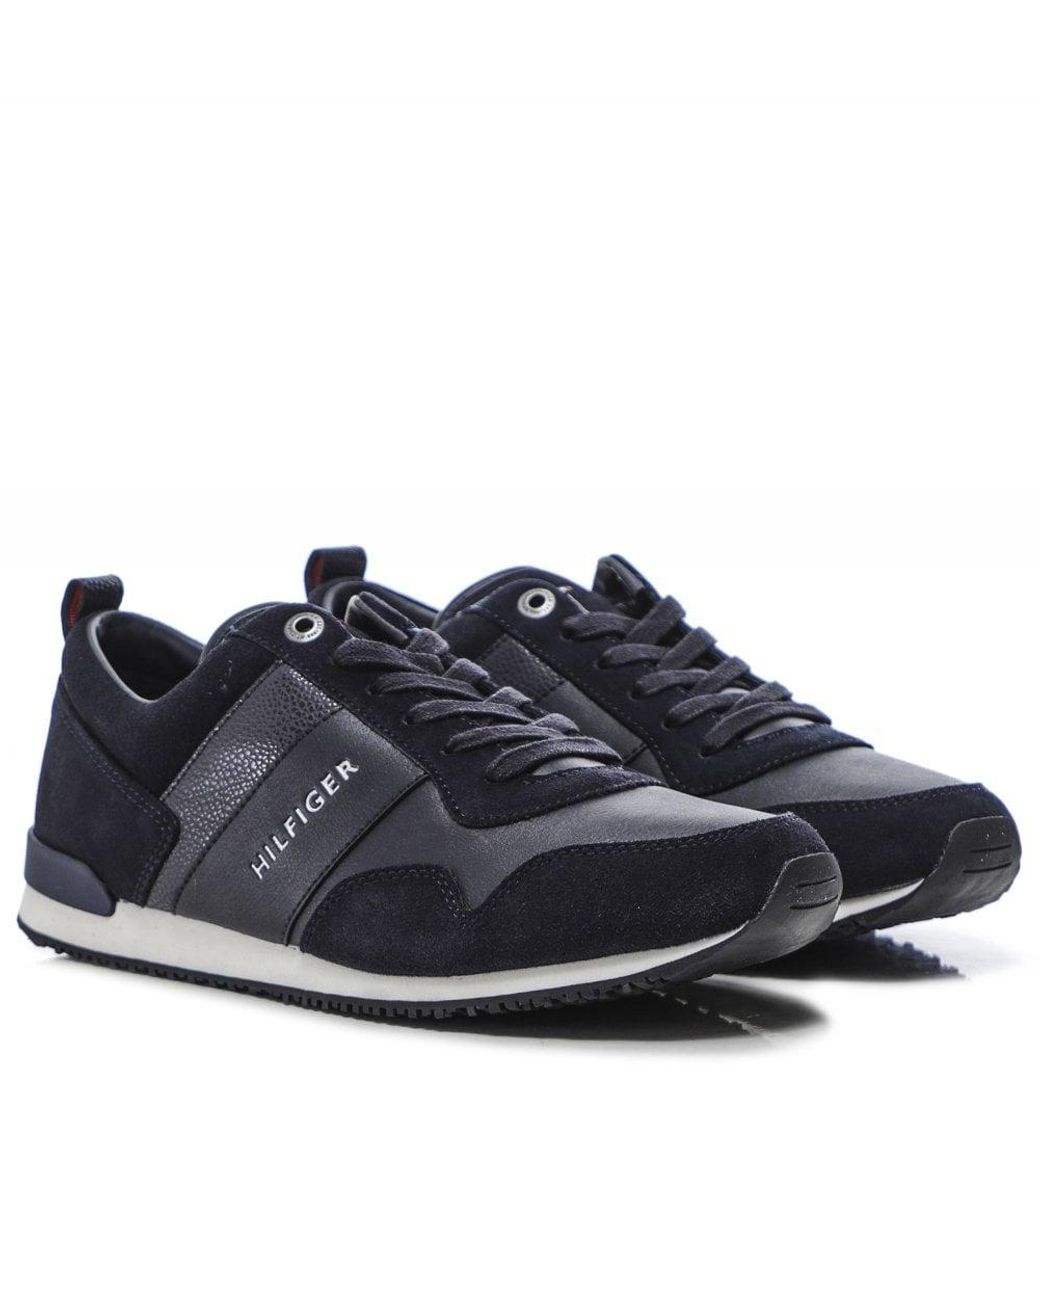 Tommy Hilfiger Iconic Runner Trainers in Navy (Blue) for Men - Lyst